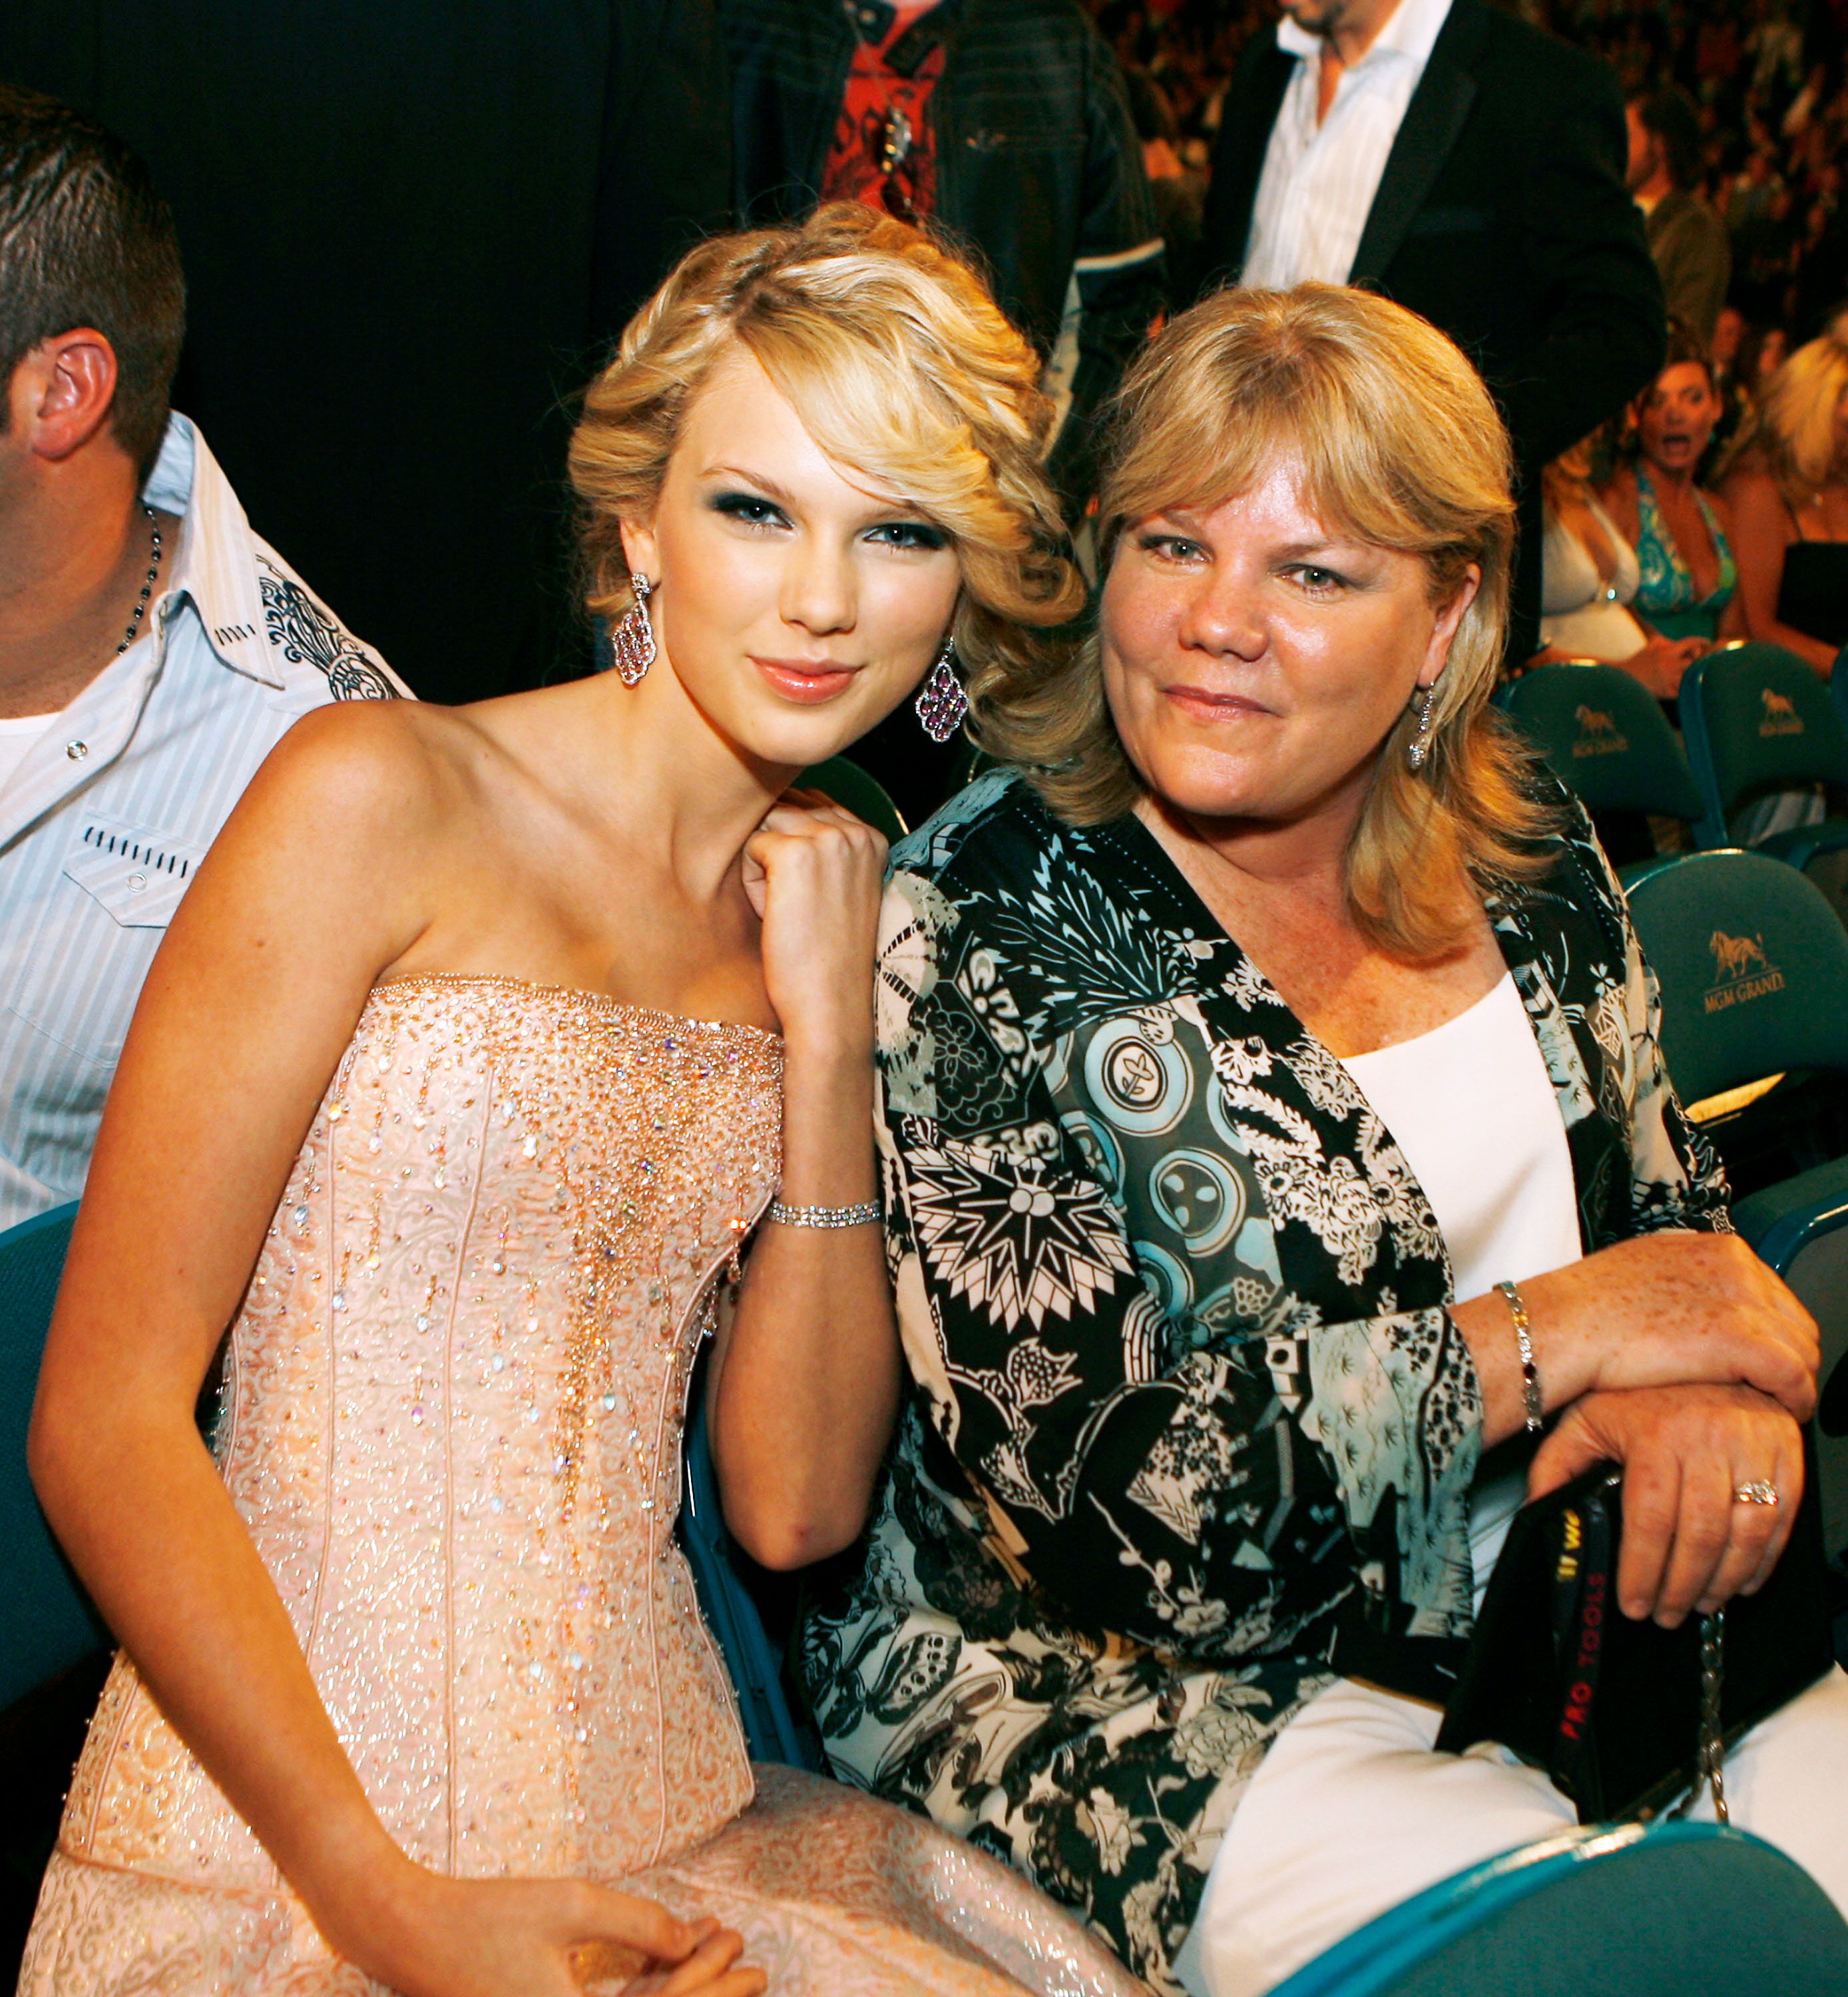 Taylor Swift Opens Up About Her Mom's Brain Tumor, Cancer Battle